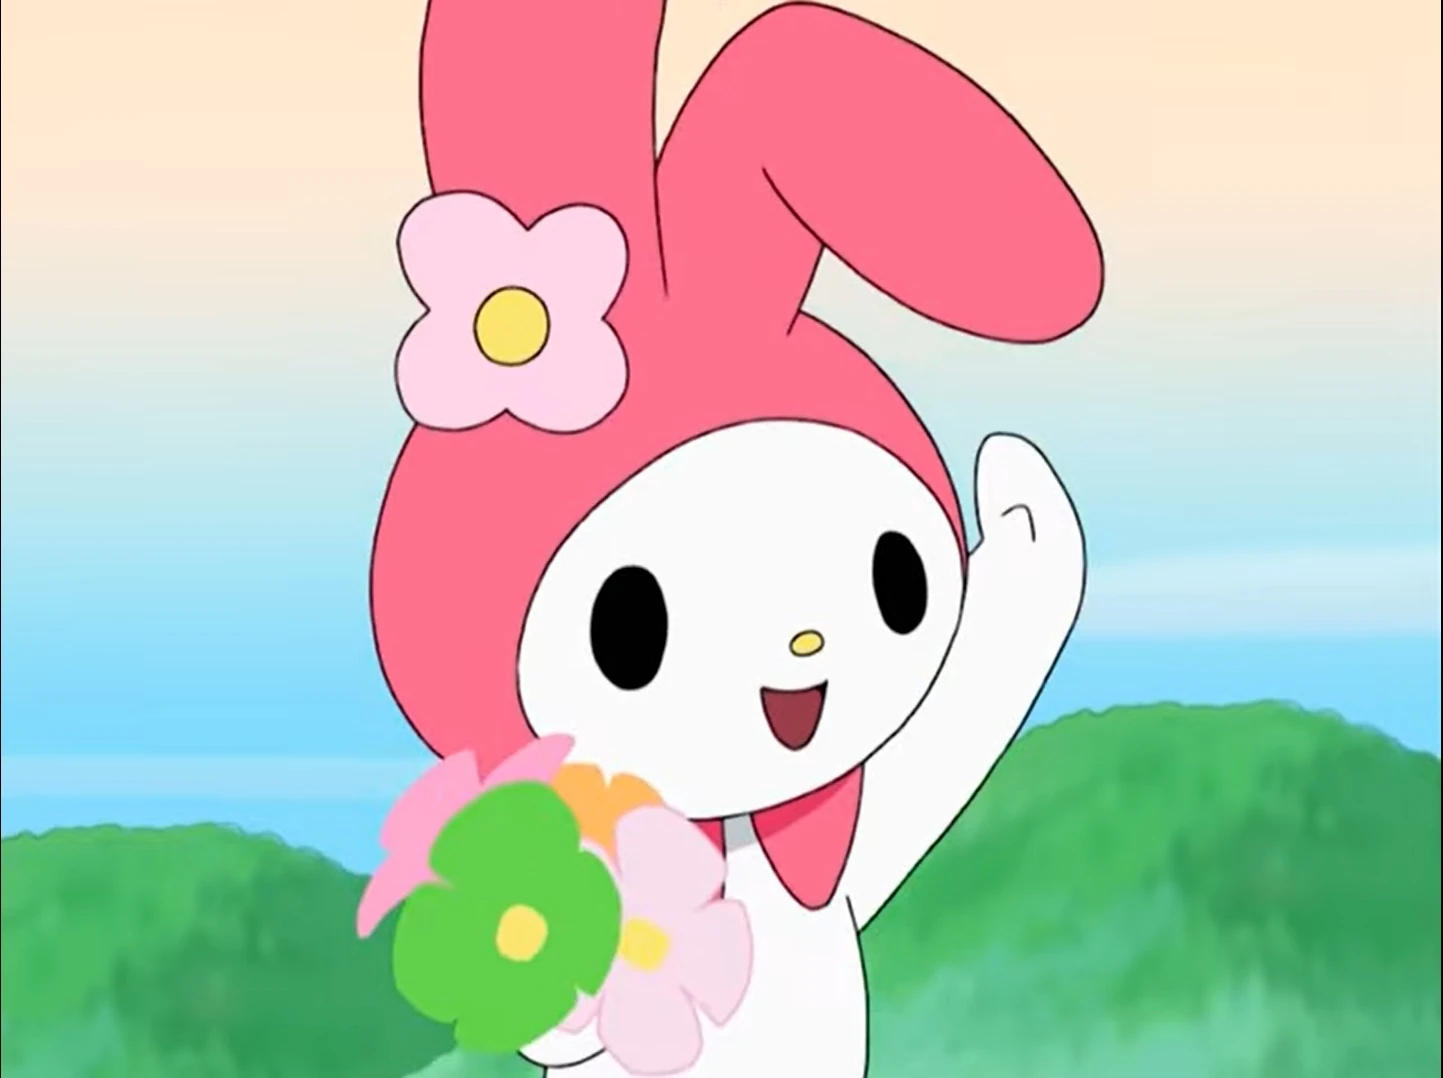 Why is My Melody so Popular?